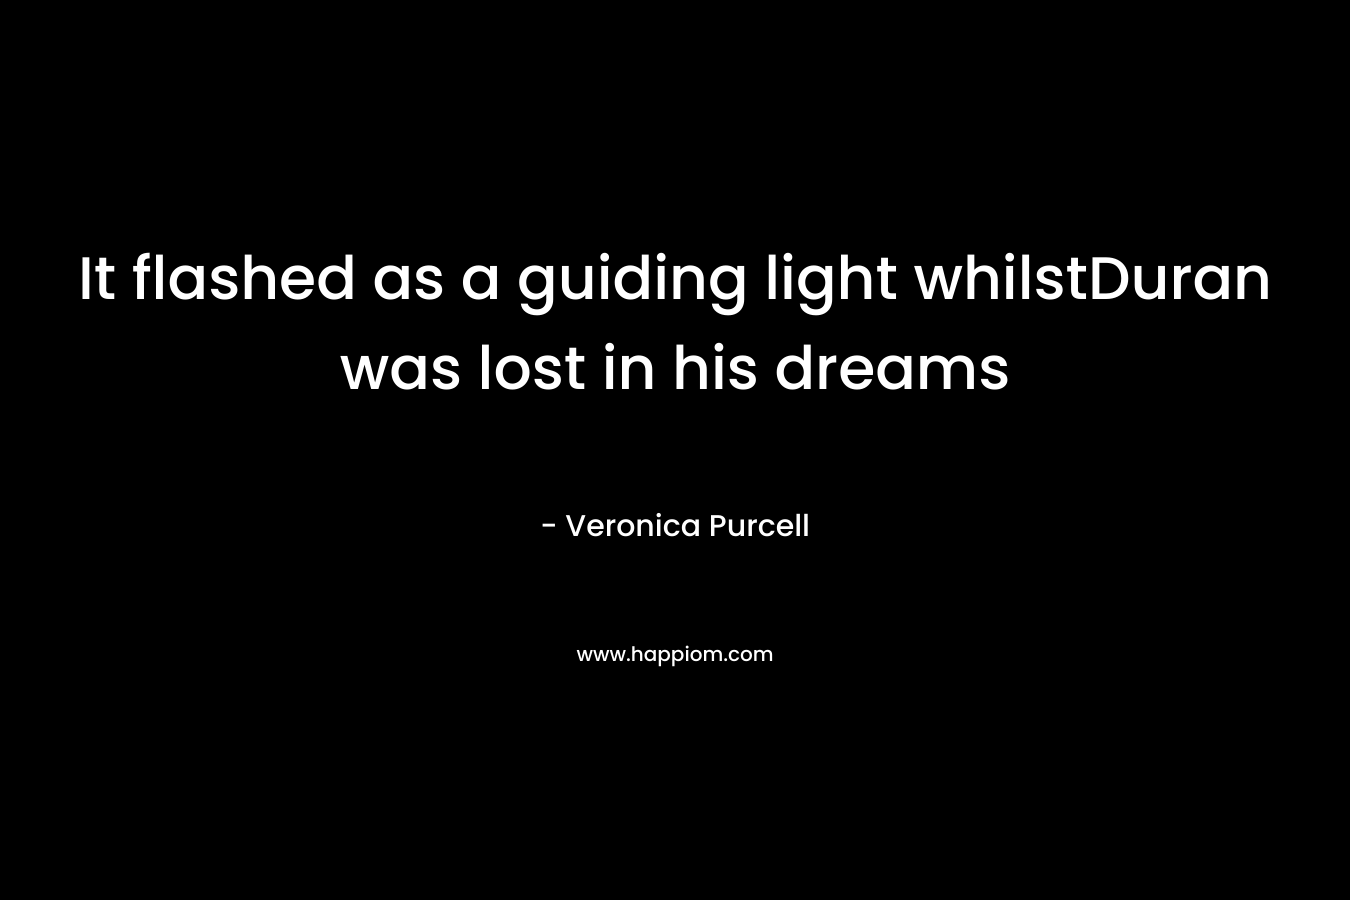 It flashed as a guiding light whilstDuran was lost in his dreams – Veronica Purcell